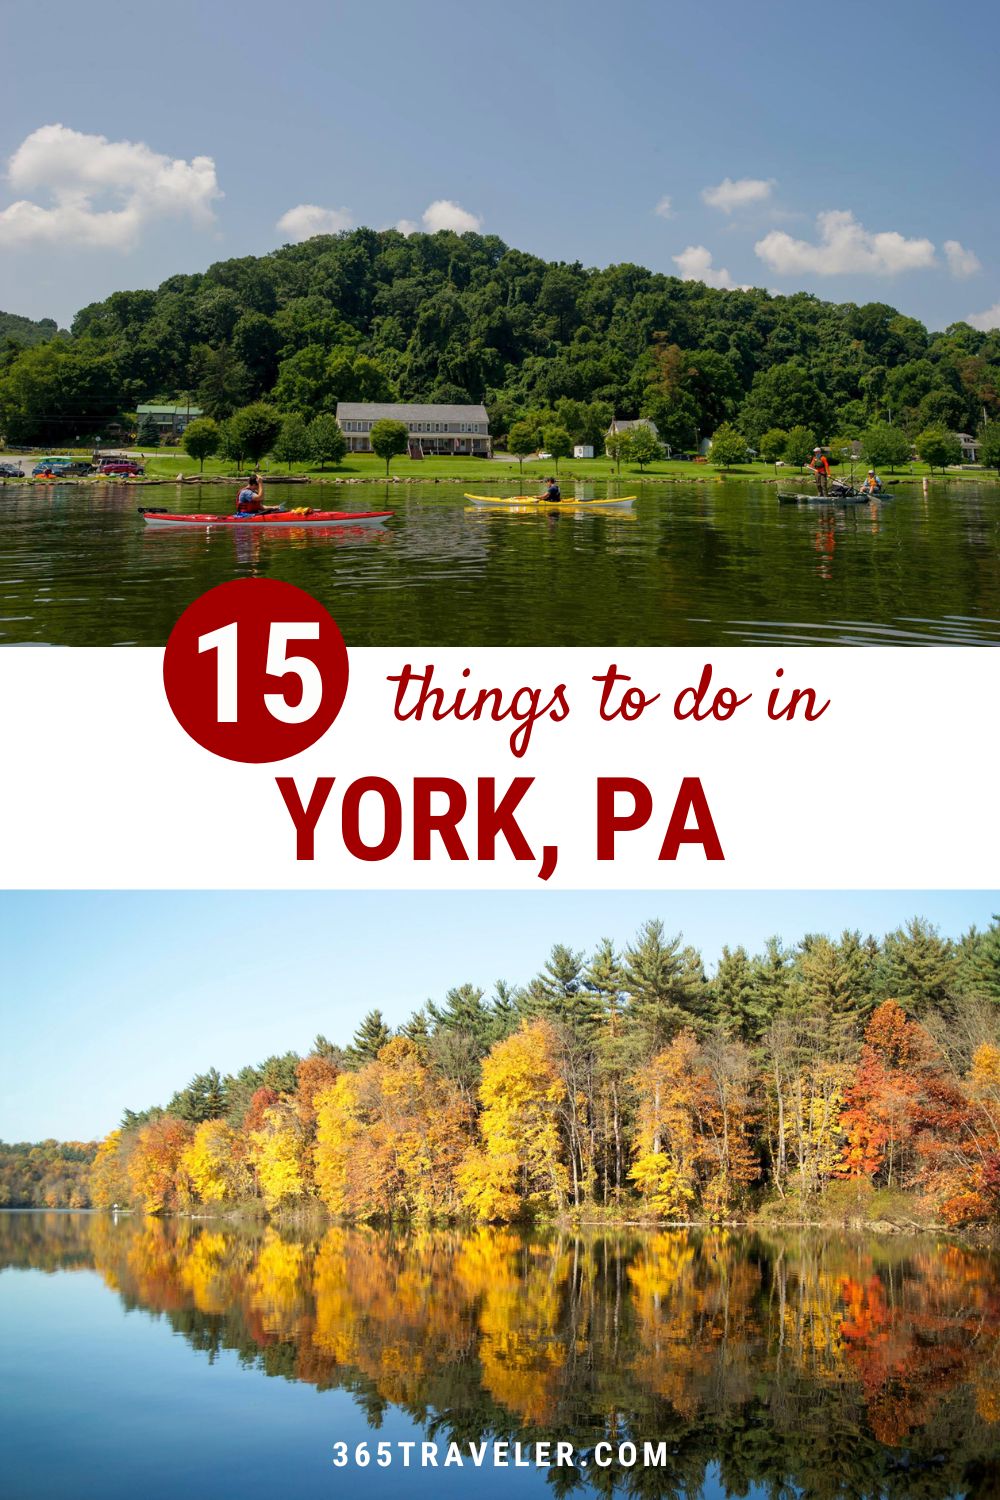 15 AMAZING THINGS TO DO IN YORK PA YOU'LL LOVE